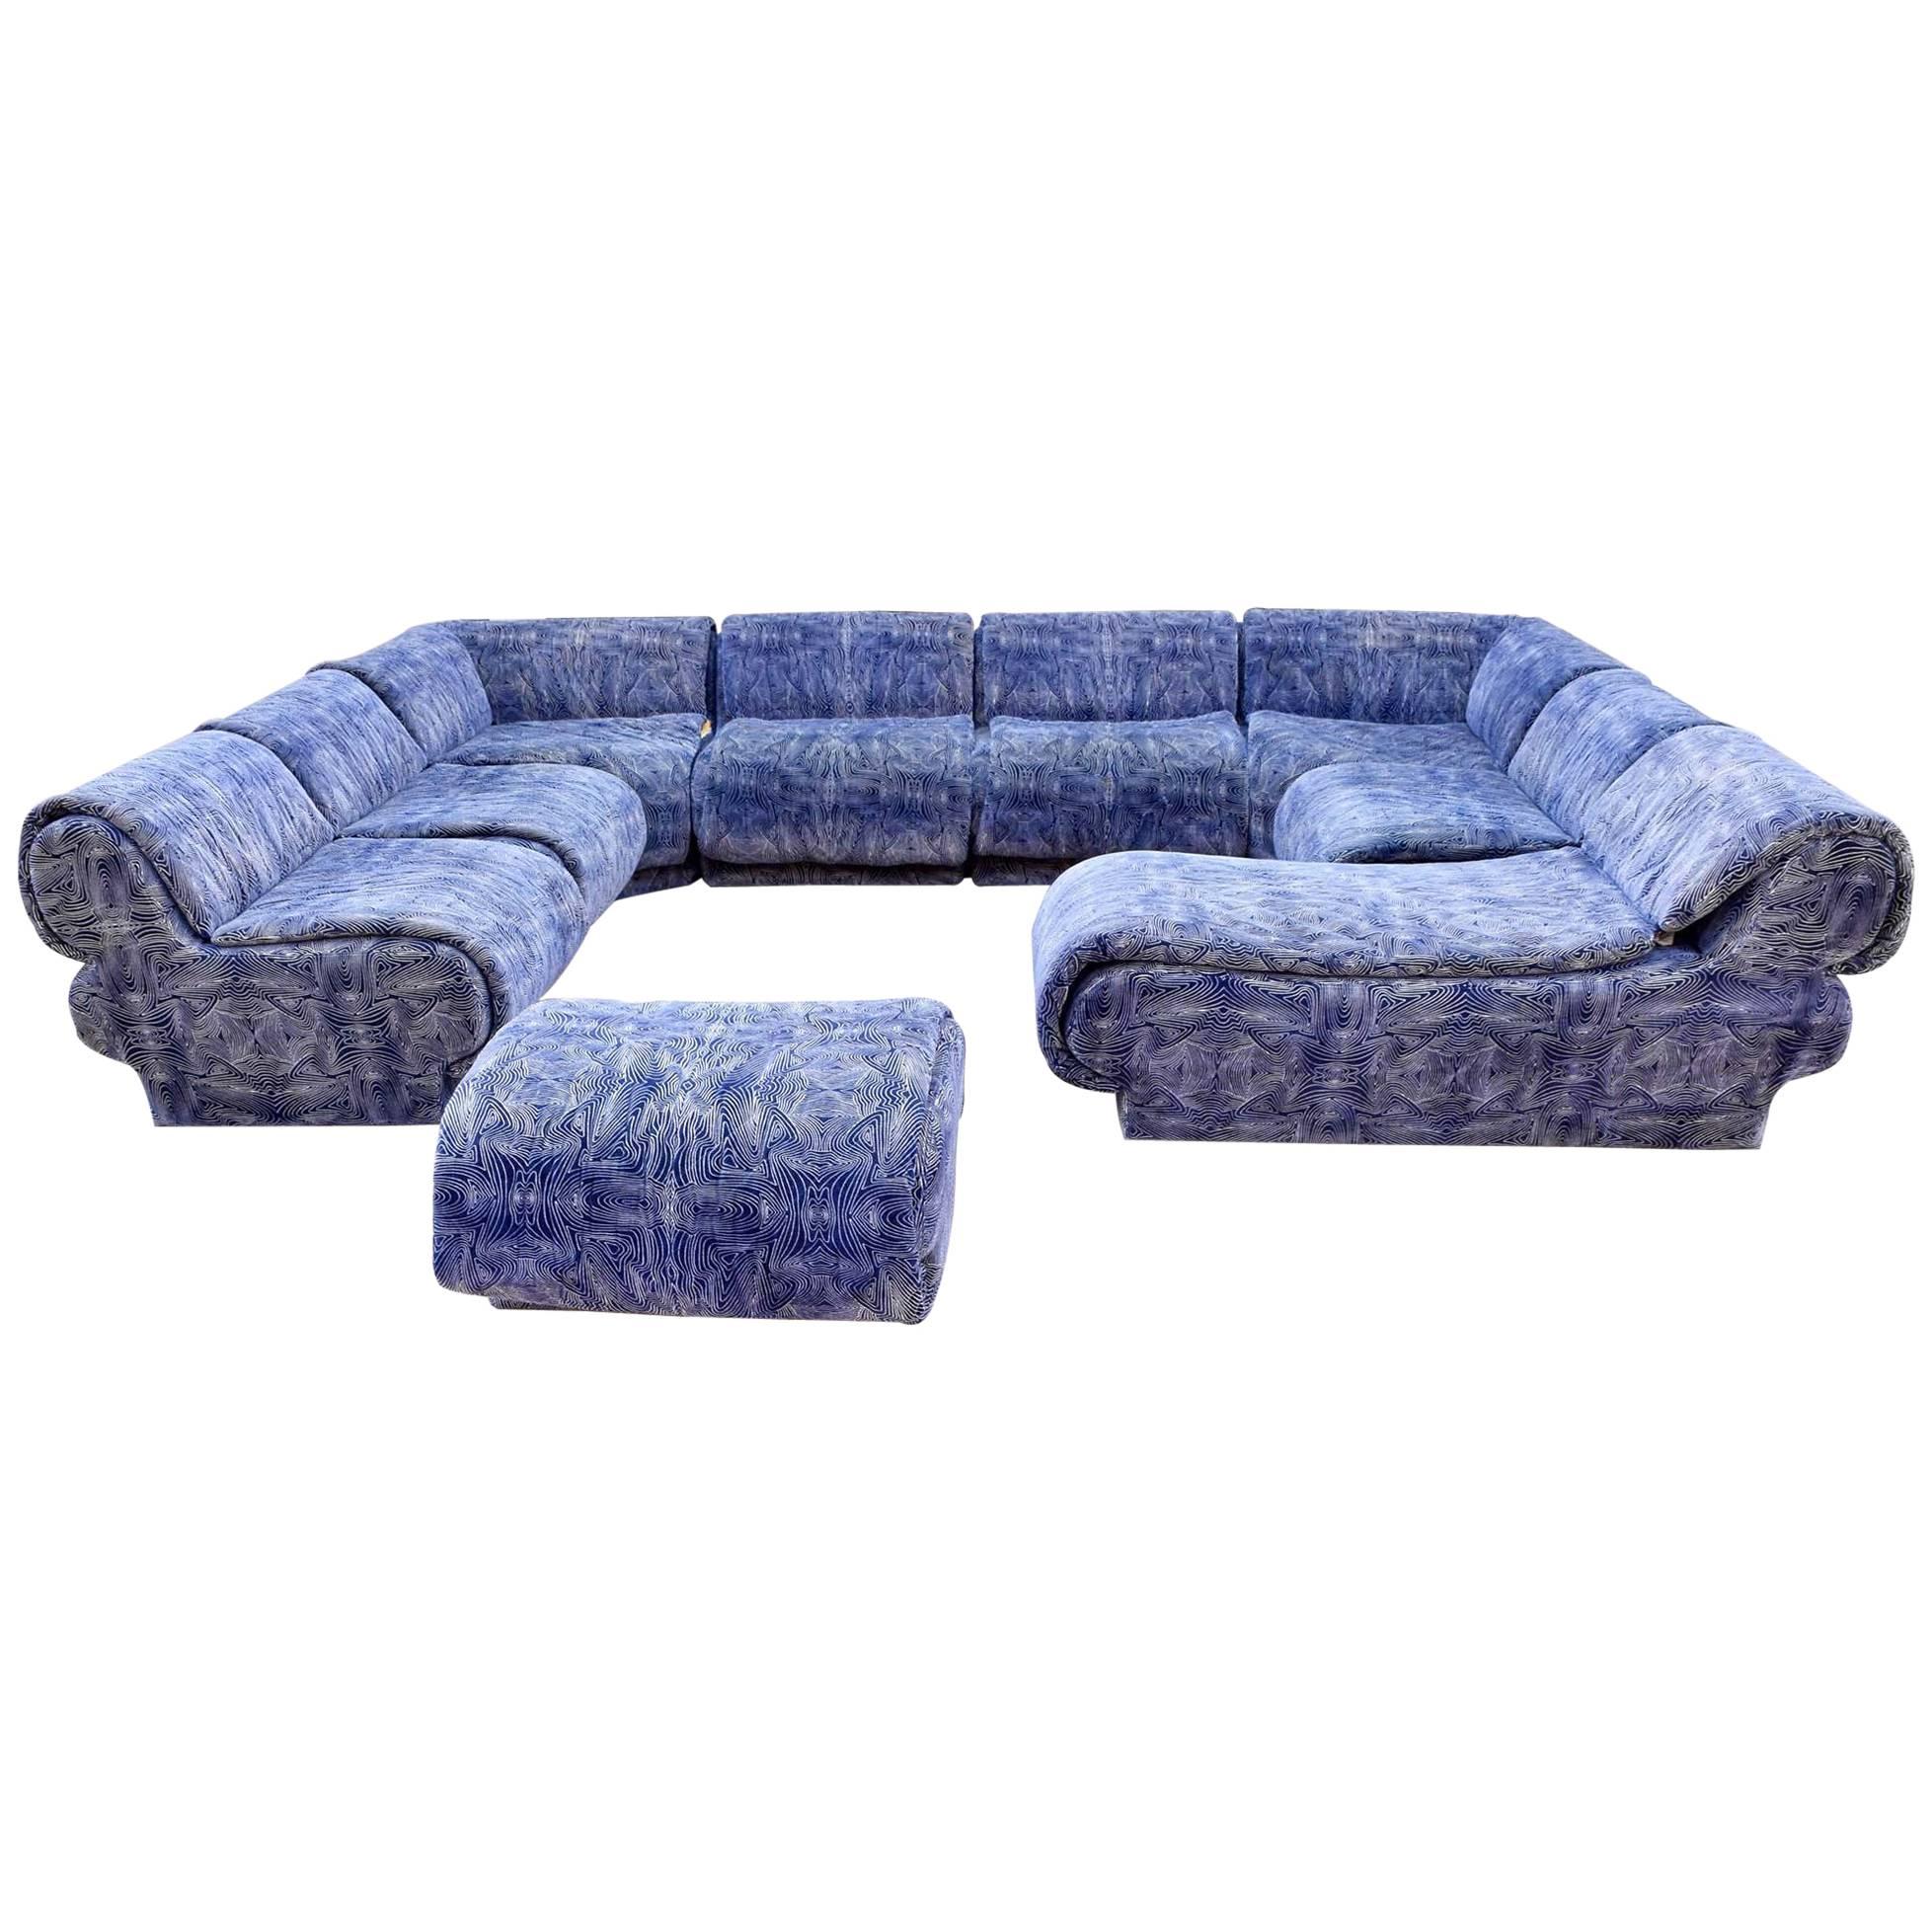 Nine-Piece Sectional by Preview, style of Vladimir Kagan